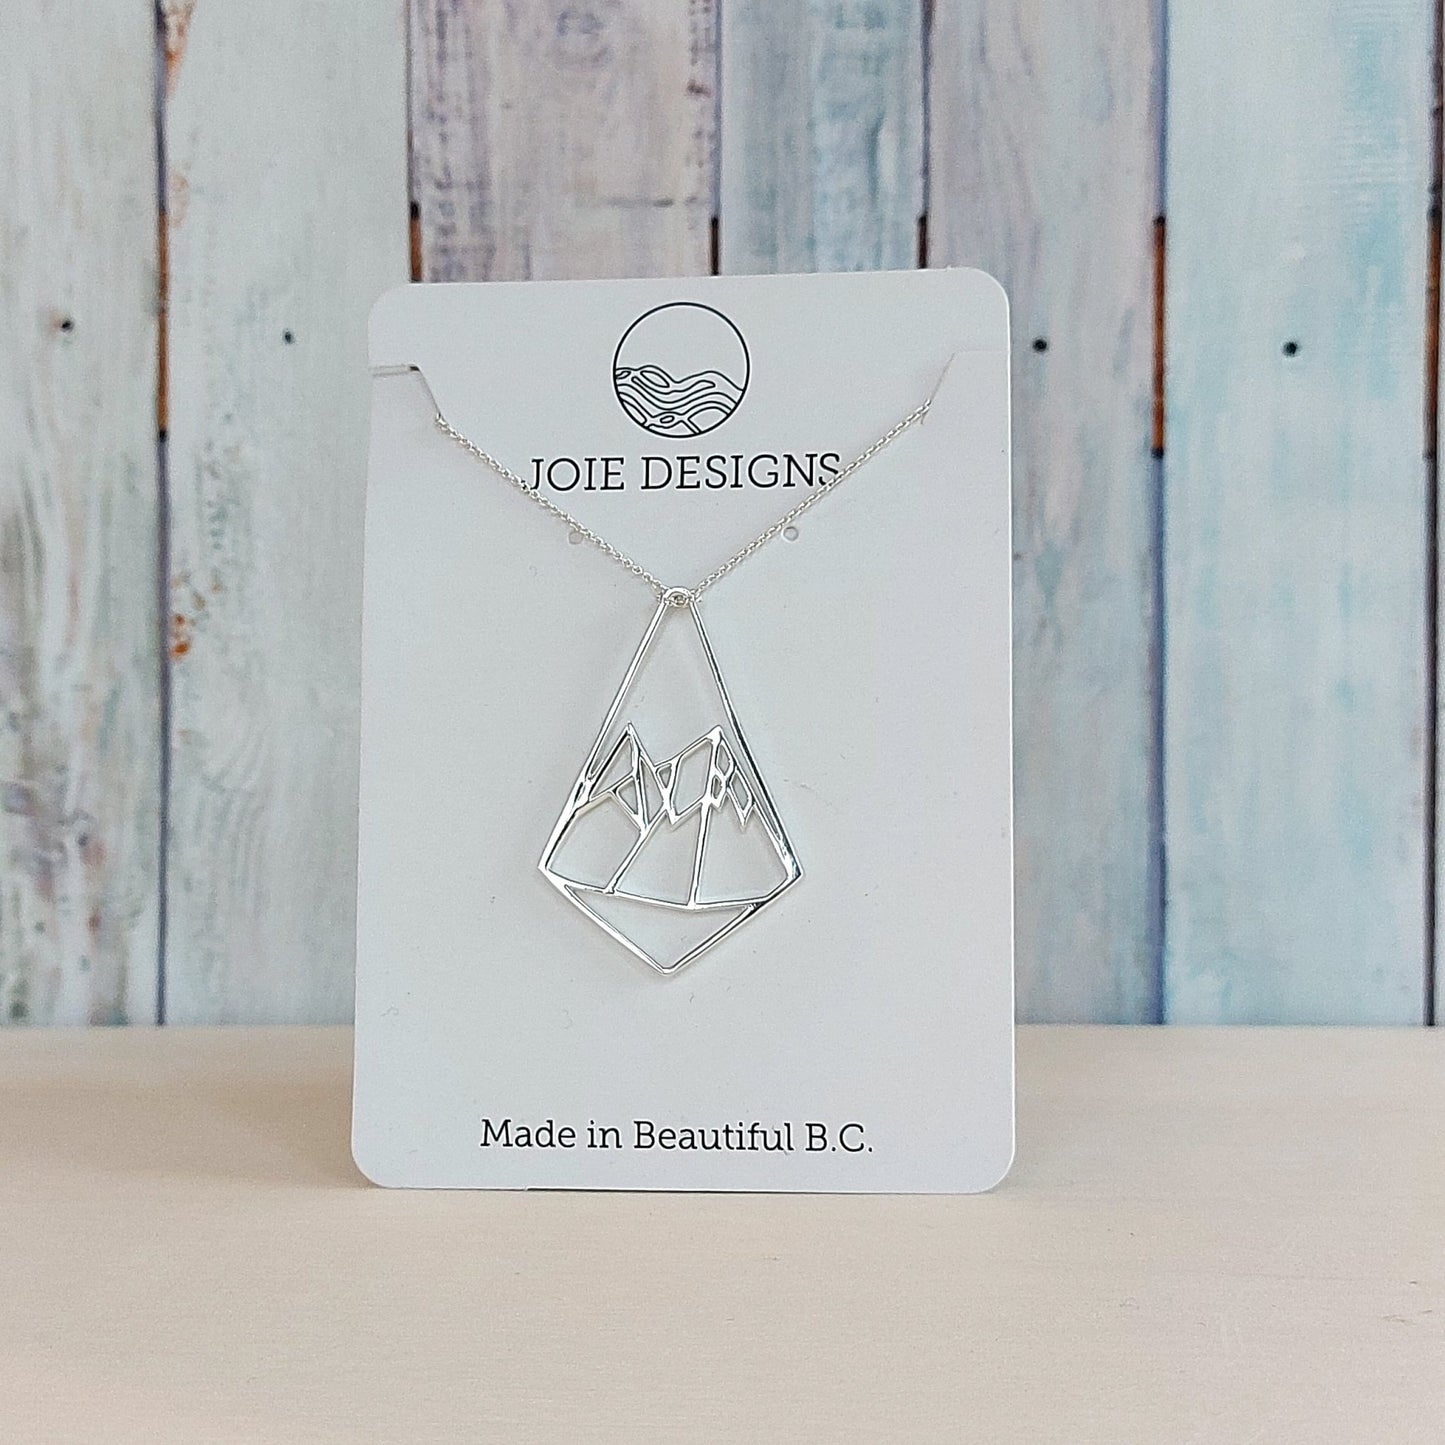 925 sterling silver geometric mountain design pendant necklace showcased on a jewellery card